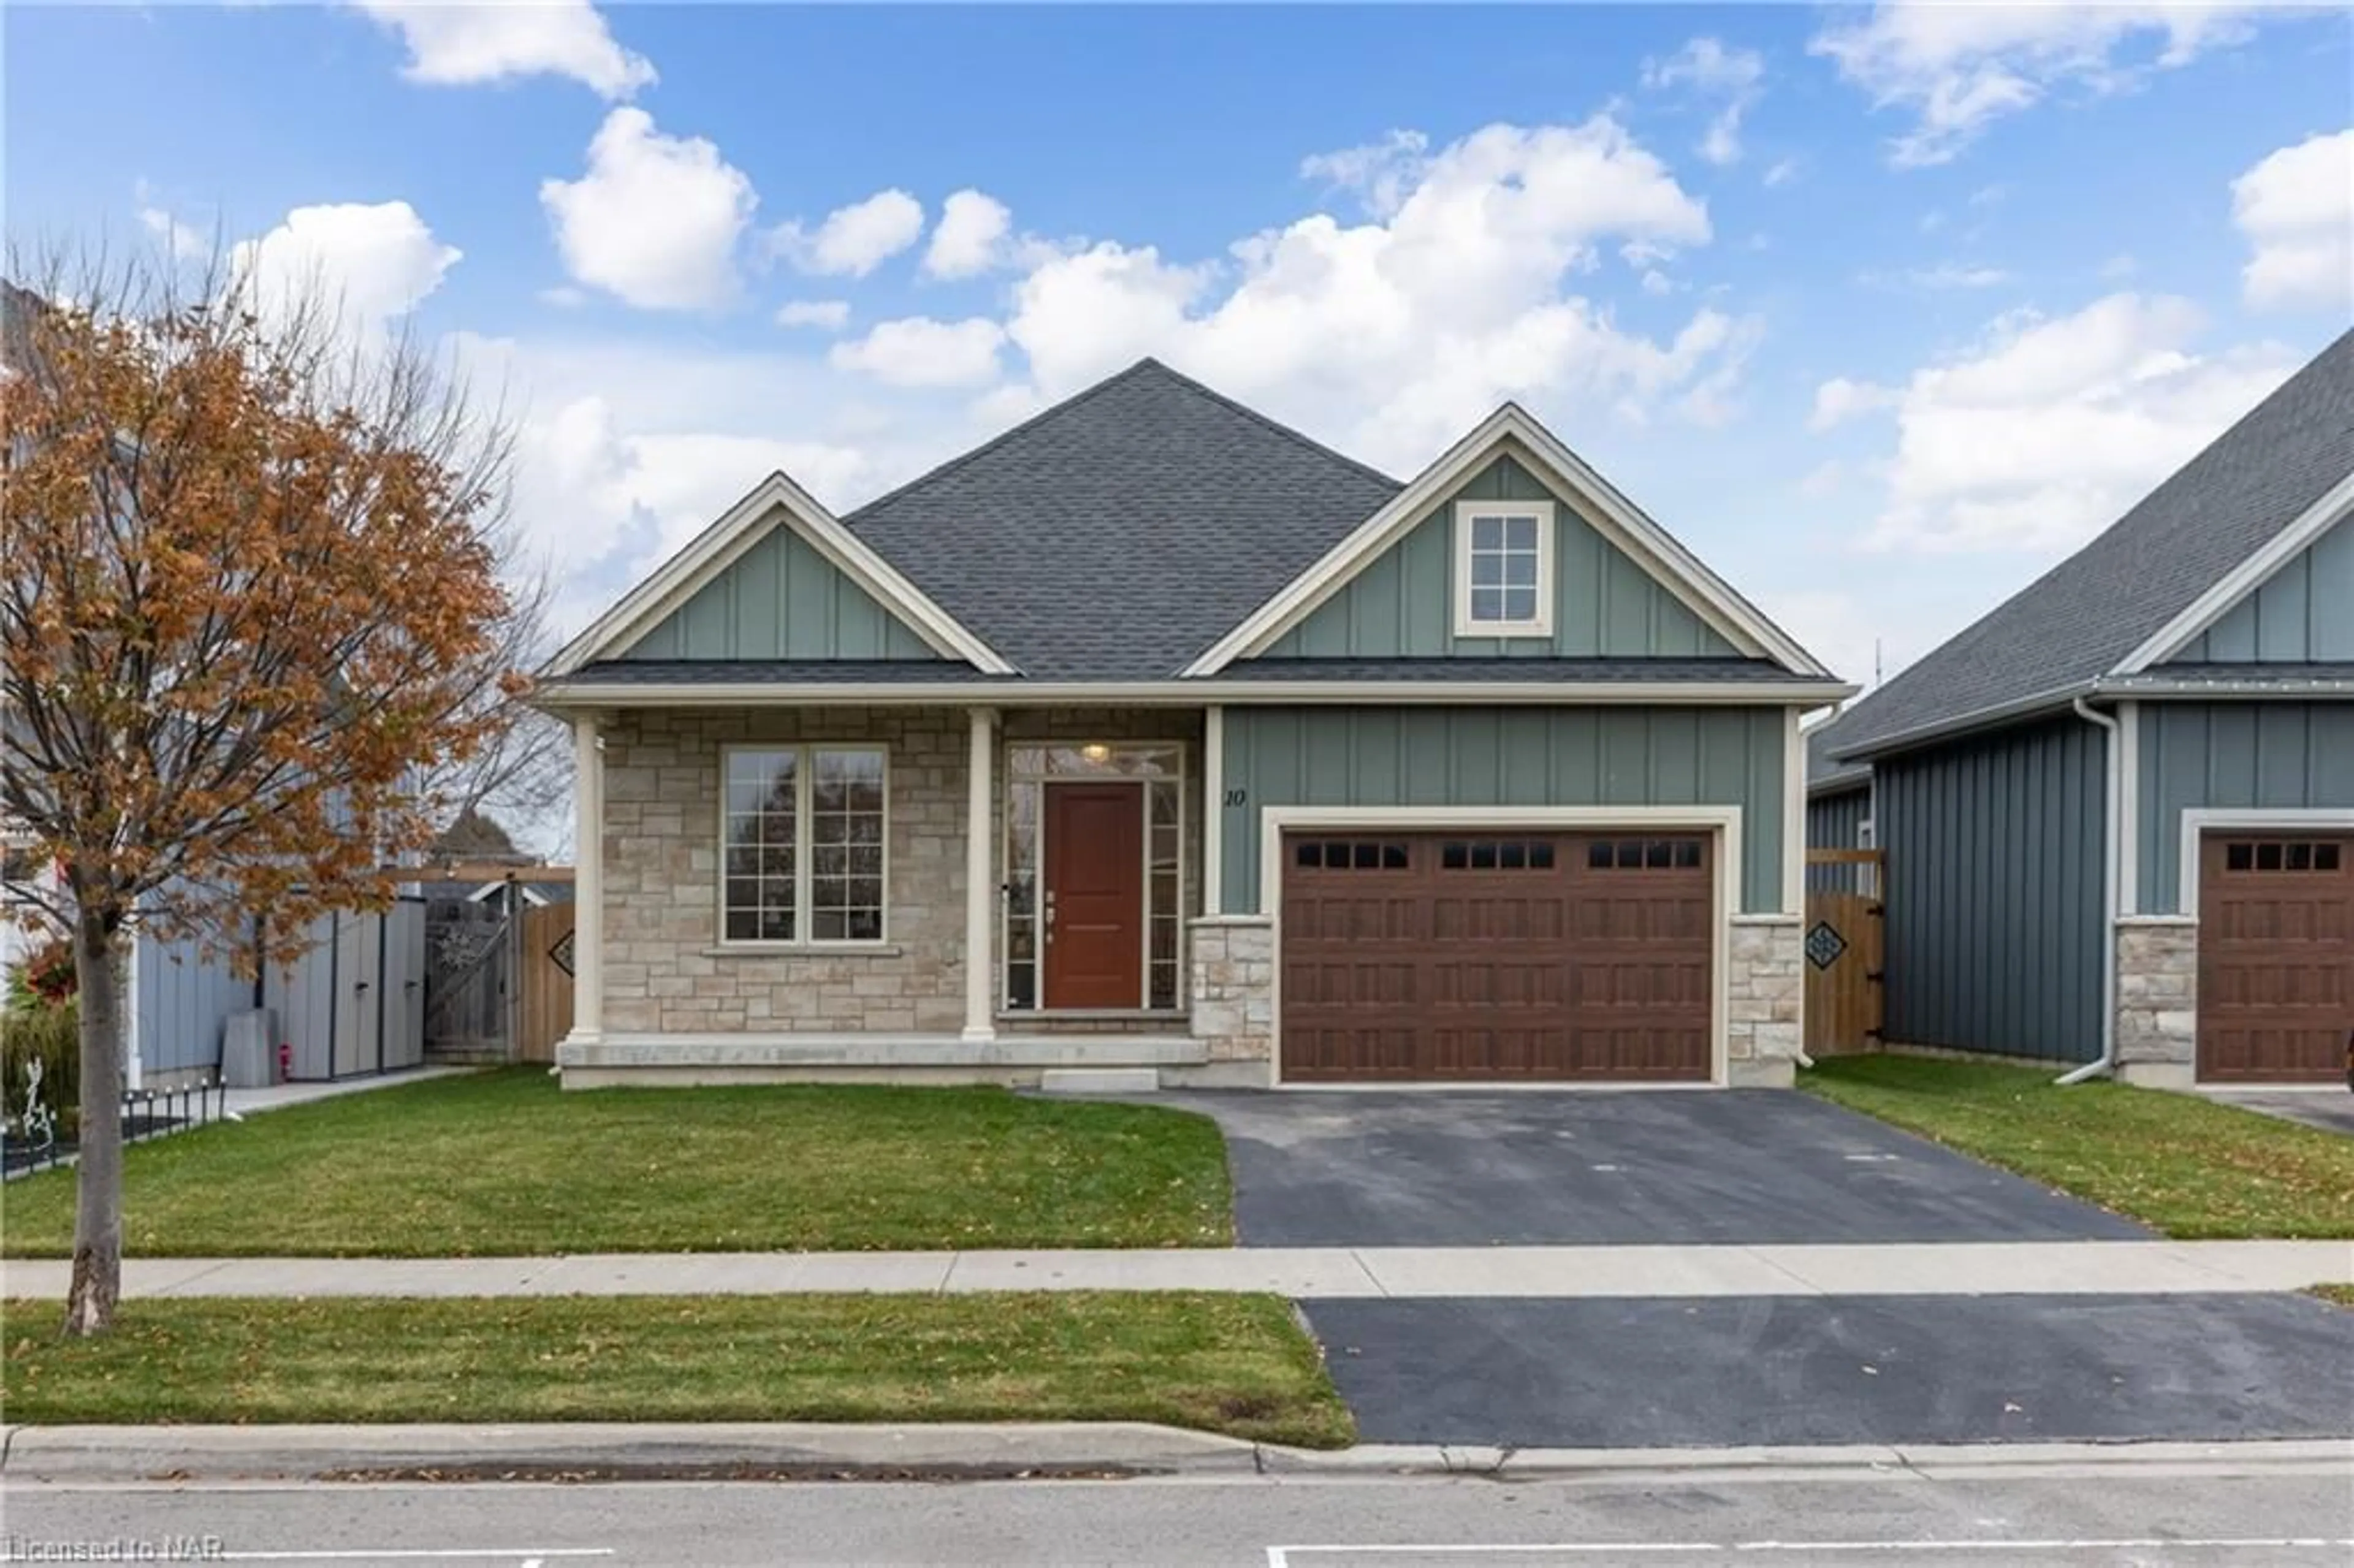 Frontside or backside of a home for 10 Summerhayes Dr, Niagara-on-the-Lake Ontario L0S 1T0